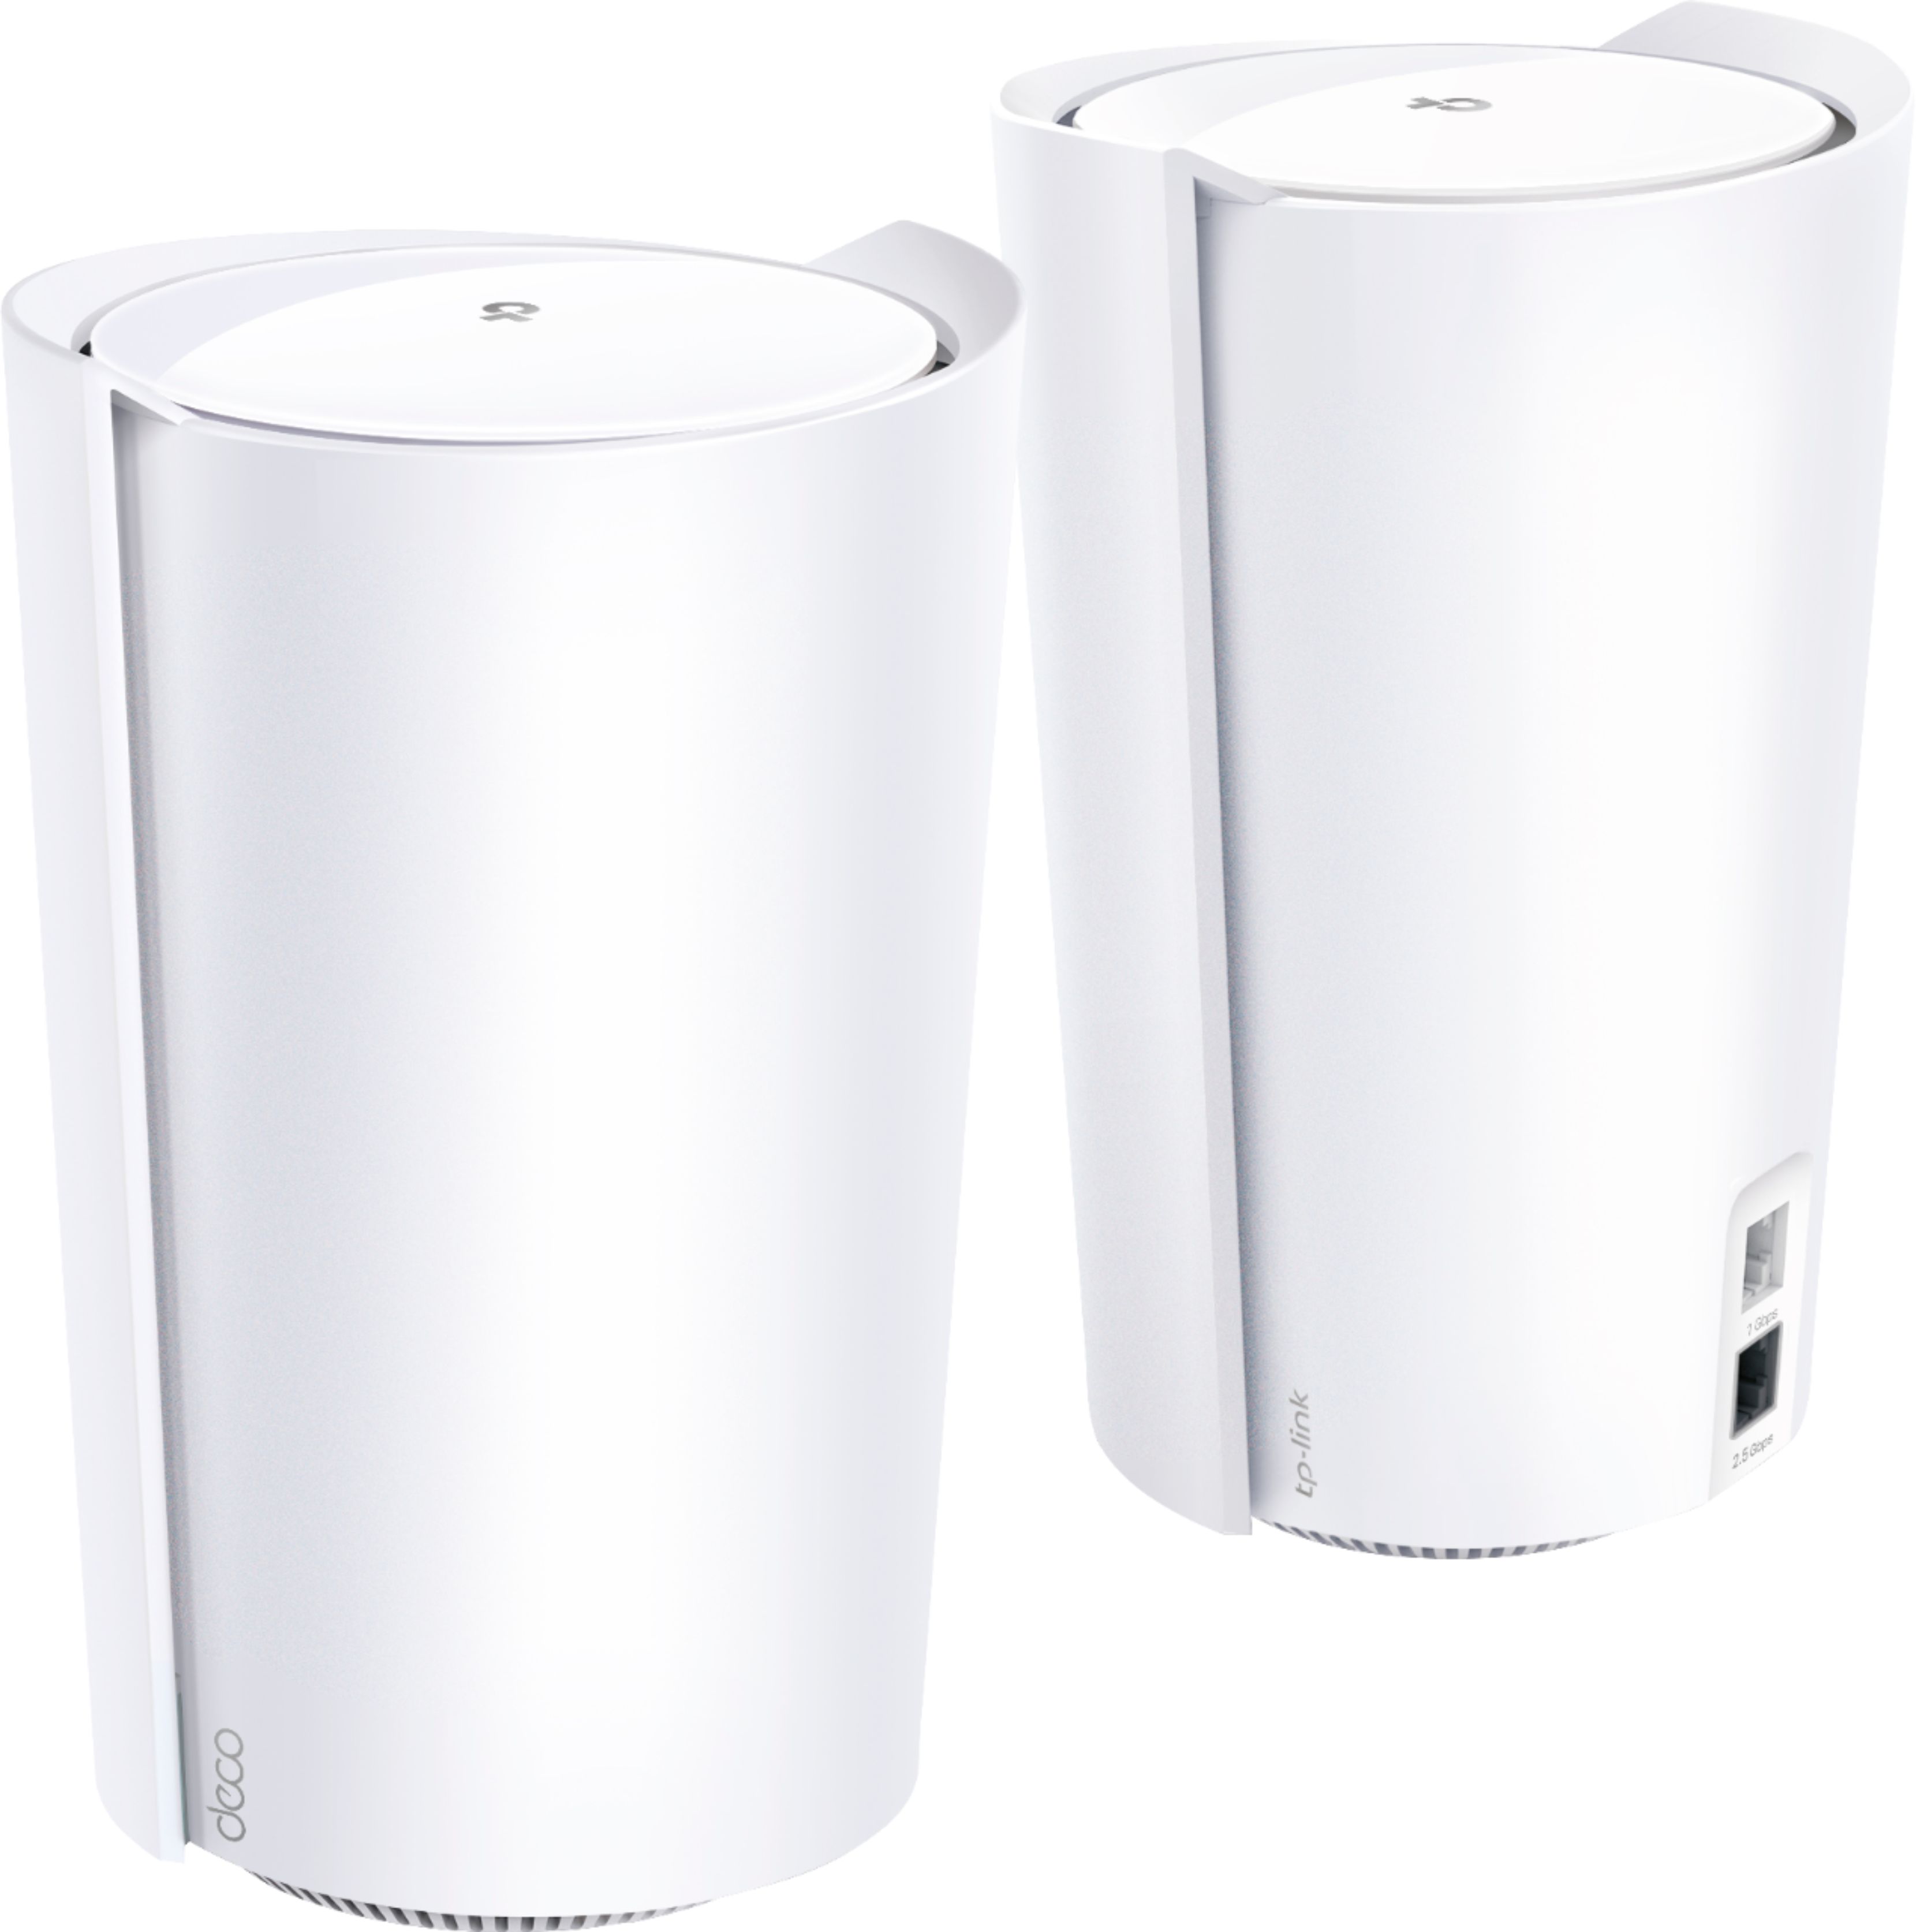 Best Buy: TP-Link Deco X90 (2-pack) AX6600 Whole Home Mesh Wi-Fi 6 